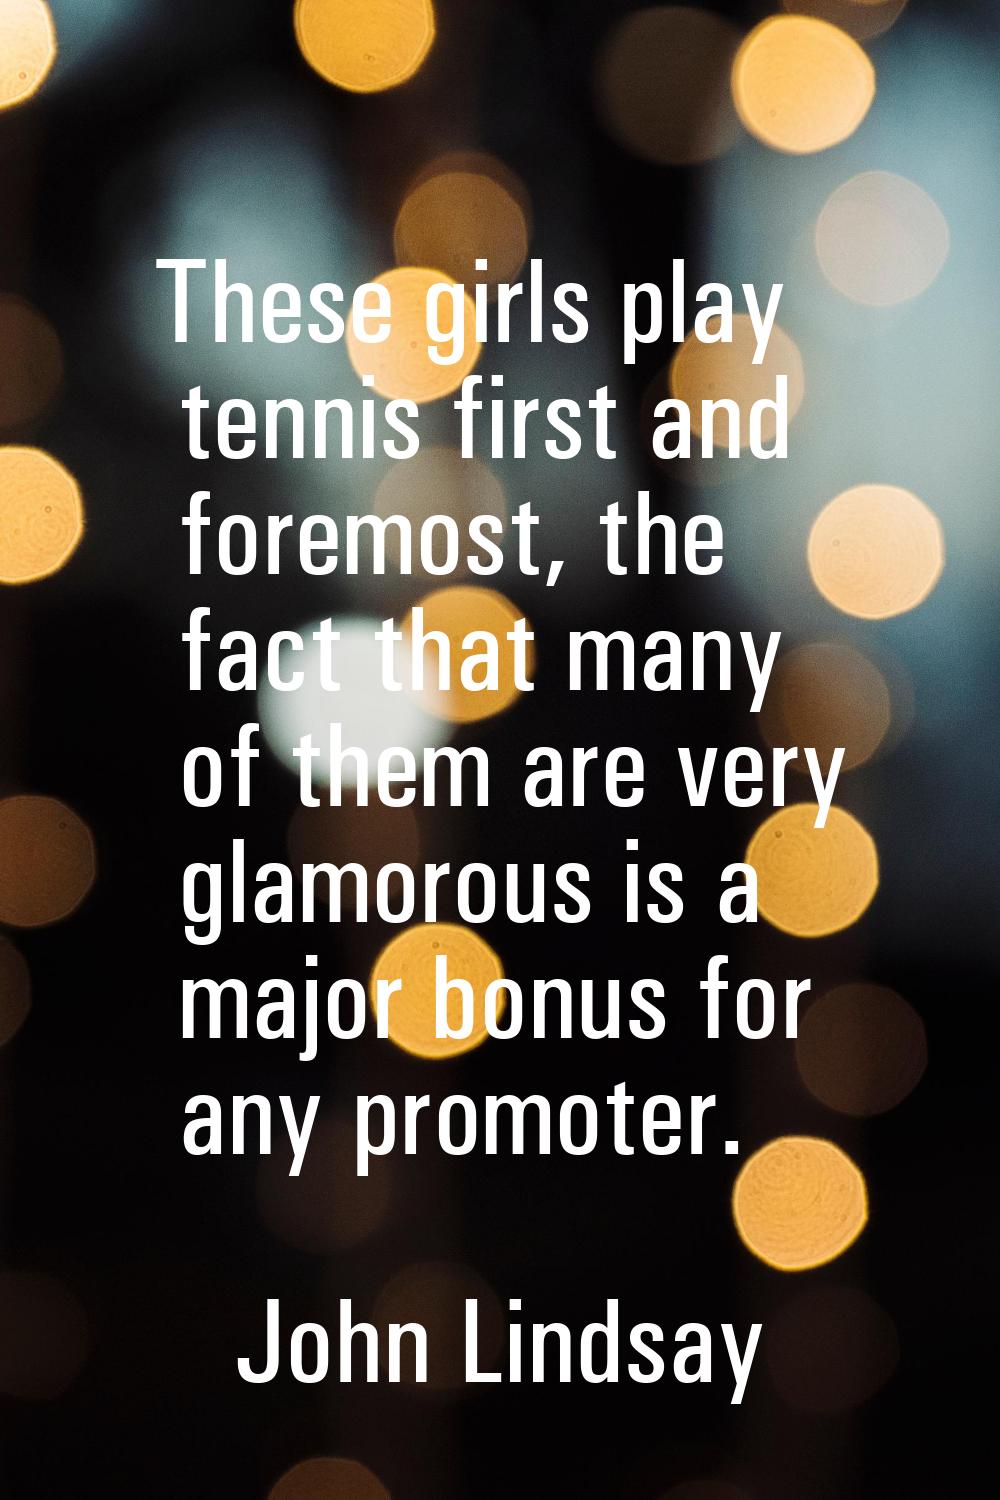 These girls play tennis first and foremost, the fact that many of them are very glamorous is a majo